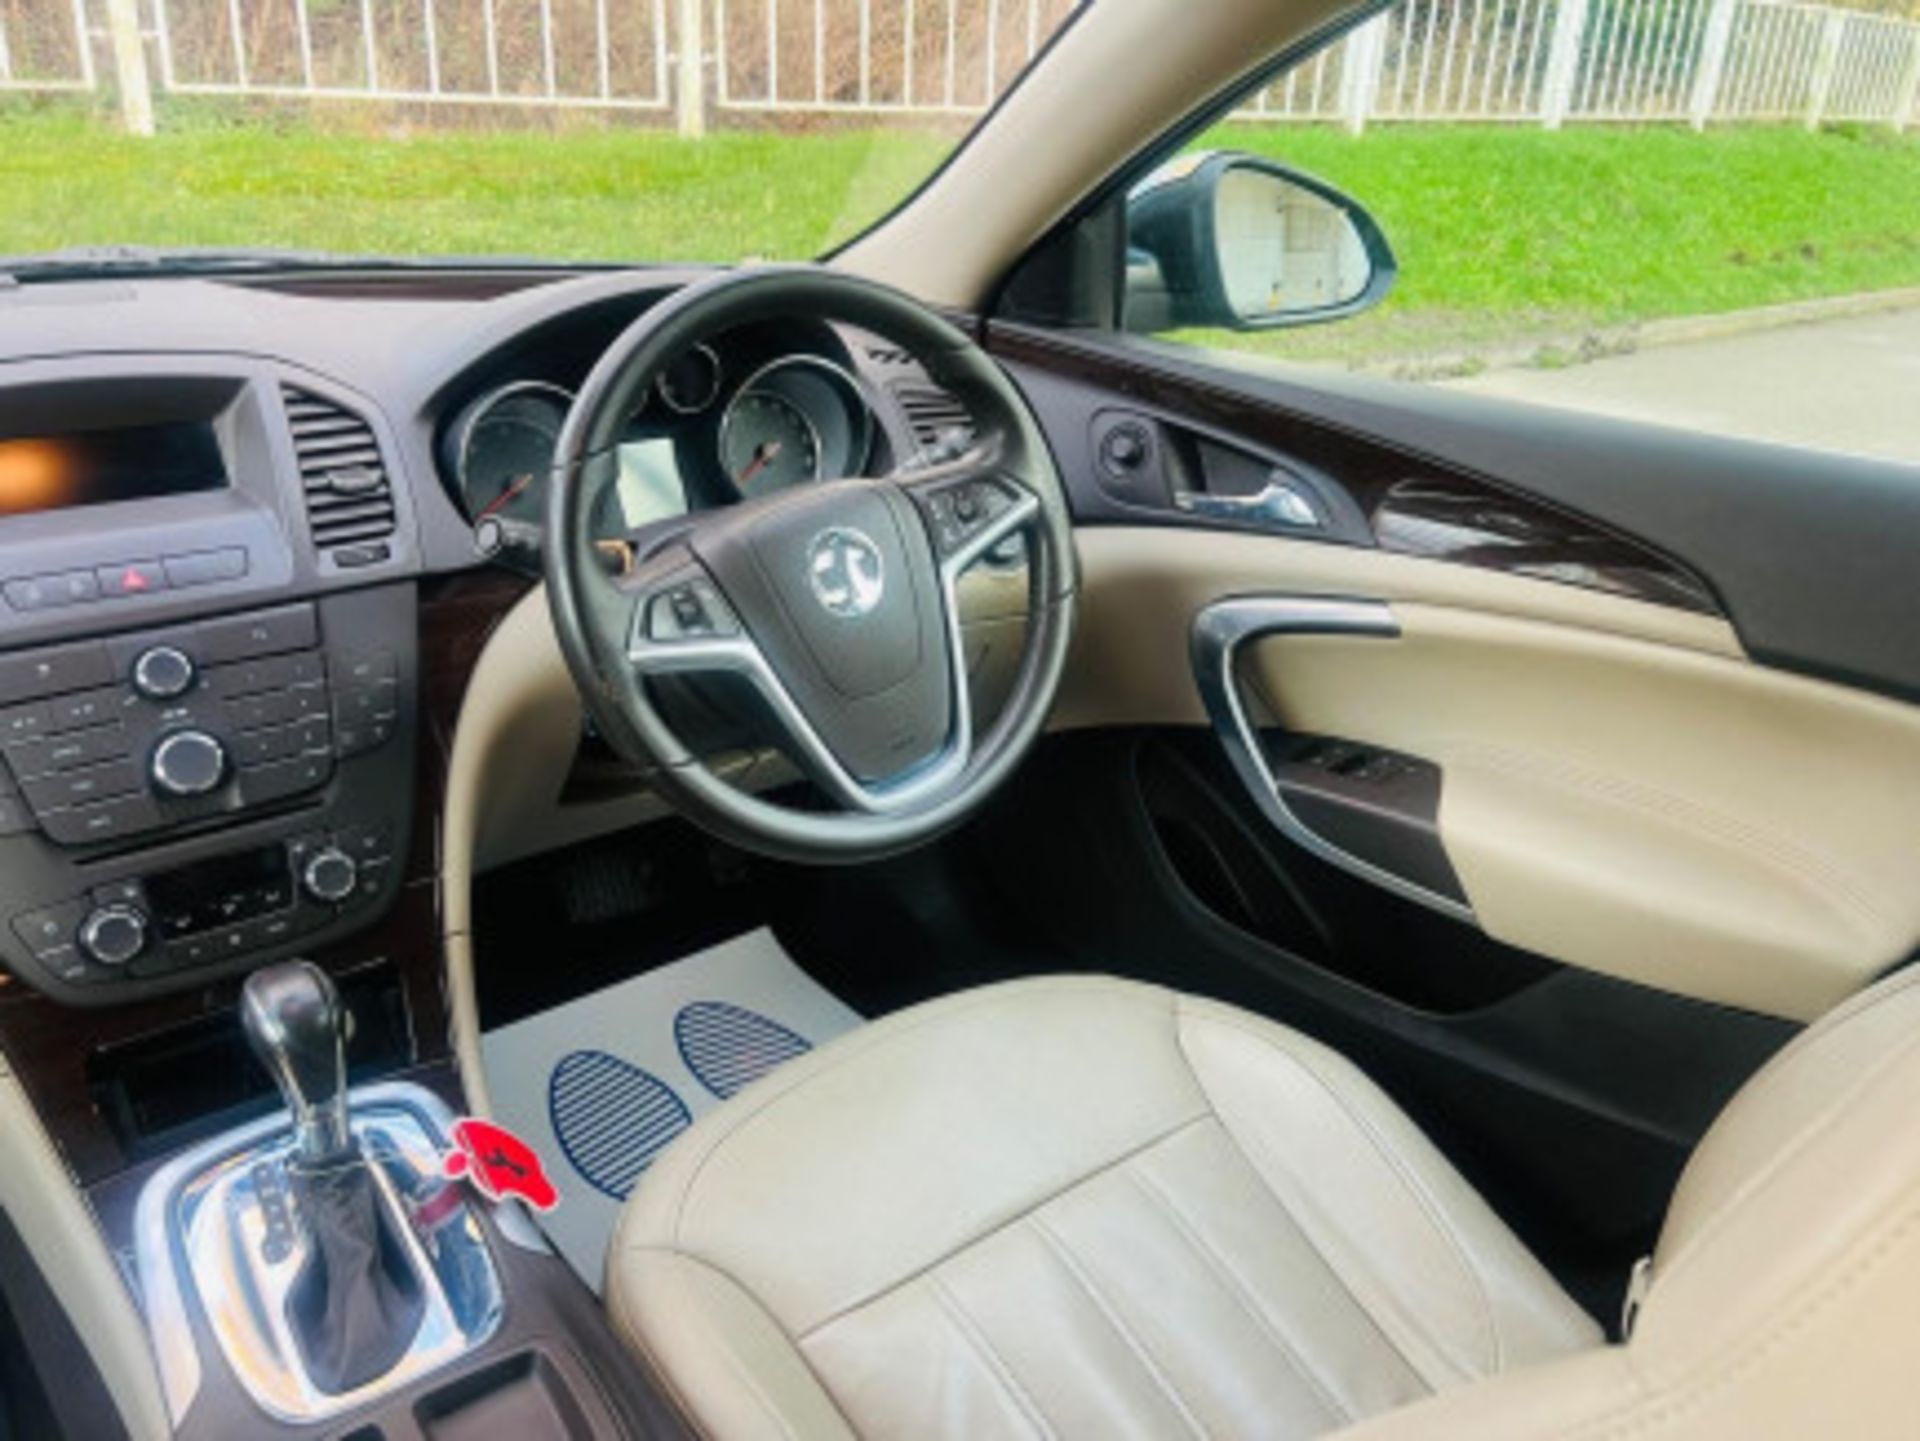 2012 VAUXHALL INSIGNIA 2.0 CDTI ELITE AUTO EURO 5 - DISCOVER EXCELLENCE >>--NO VAT ON HAMMER--<< - Image 23 of 120